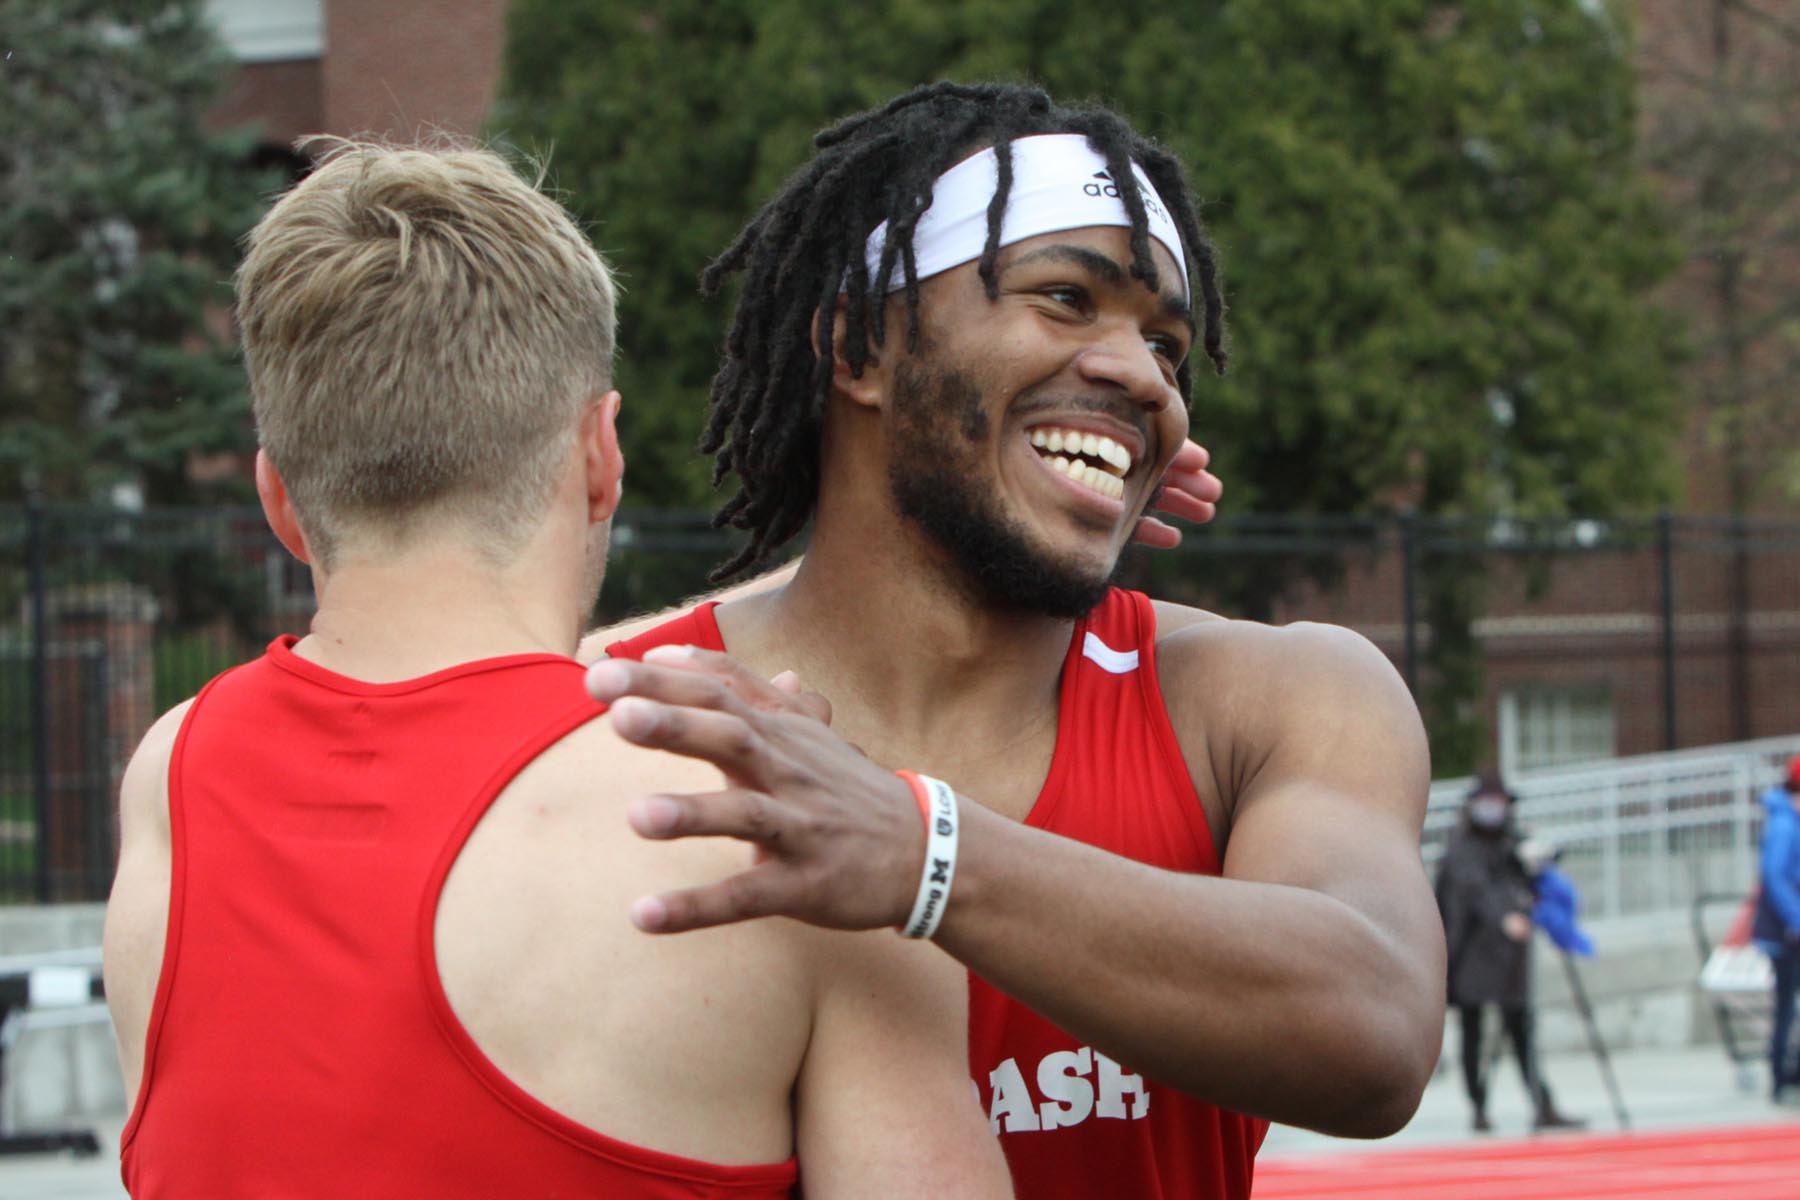 Warbington helped Wabash captured its eighth North Coast Athletic Conference Men's Indoor Track and Field Championship on Feb. 26, 2022, and the program's 16th indoor and outdoor title overall. He won the 60-meter hurdles for an NCAC individual title and all-conference honors, turning in a time of 8.49 in the finals for the victory.